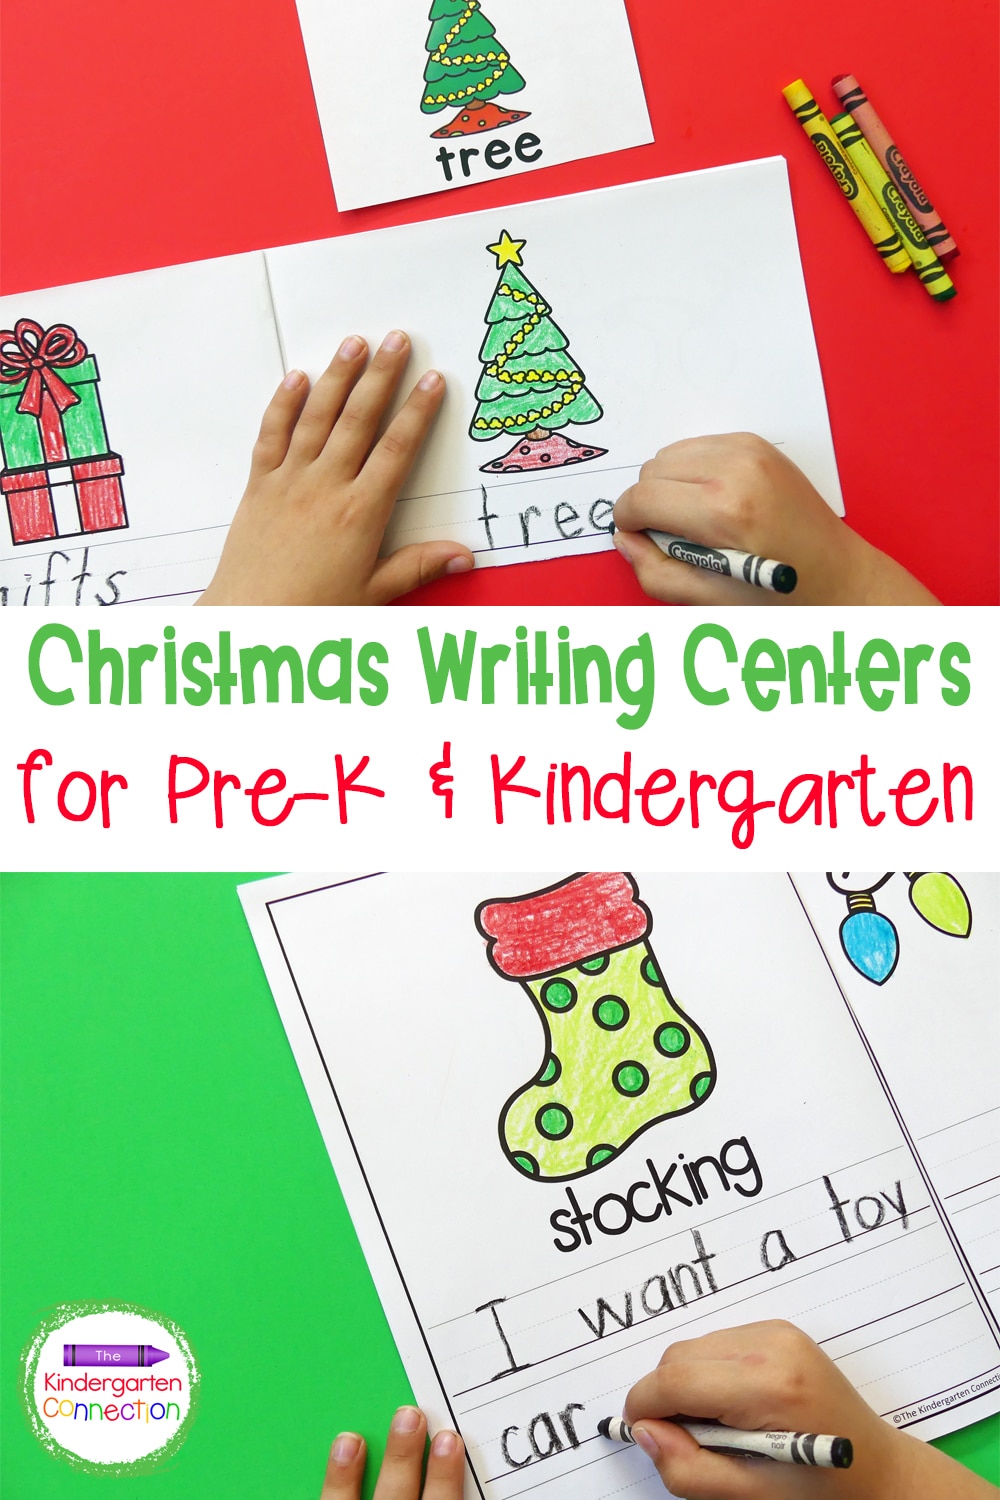 These Christmas Writing Activities for Pre-K & Kindergarten are a fun way to get kids writing with Christmas vocabulary words!